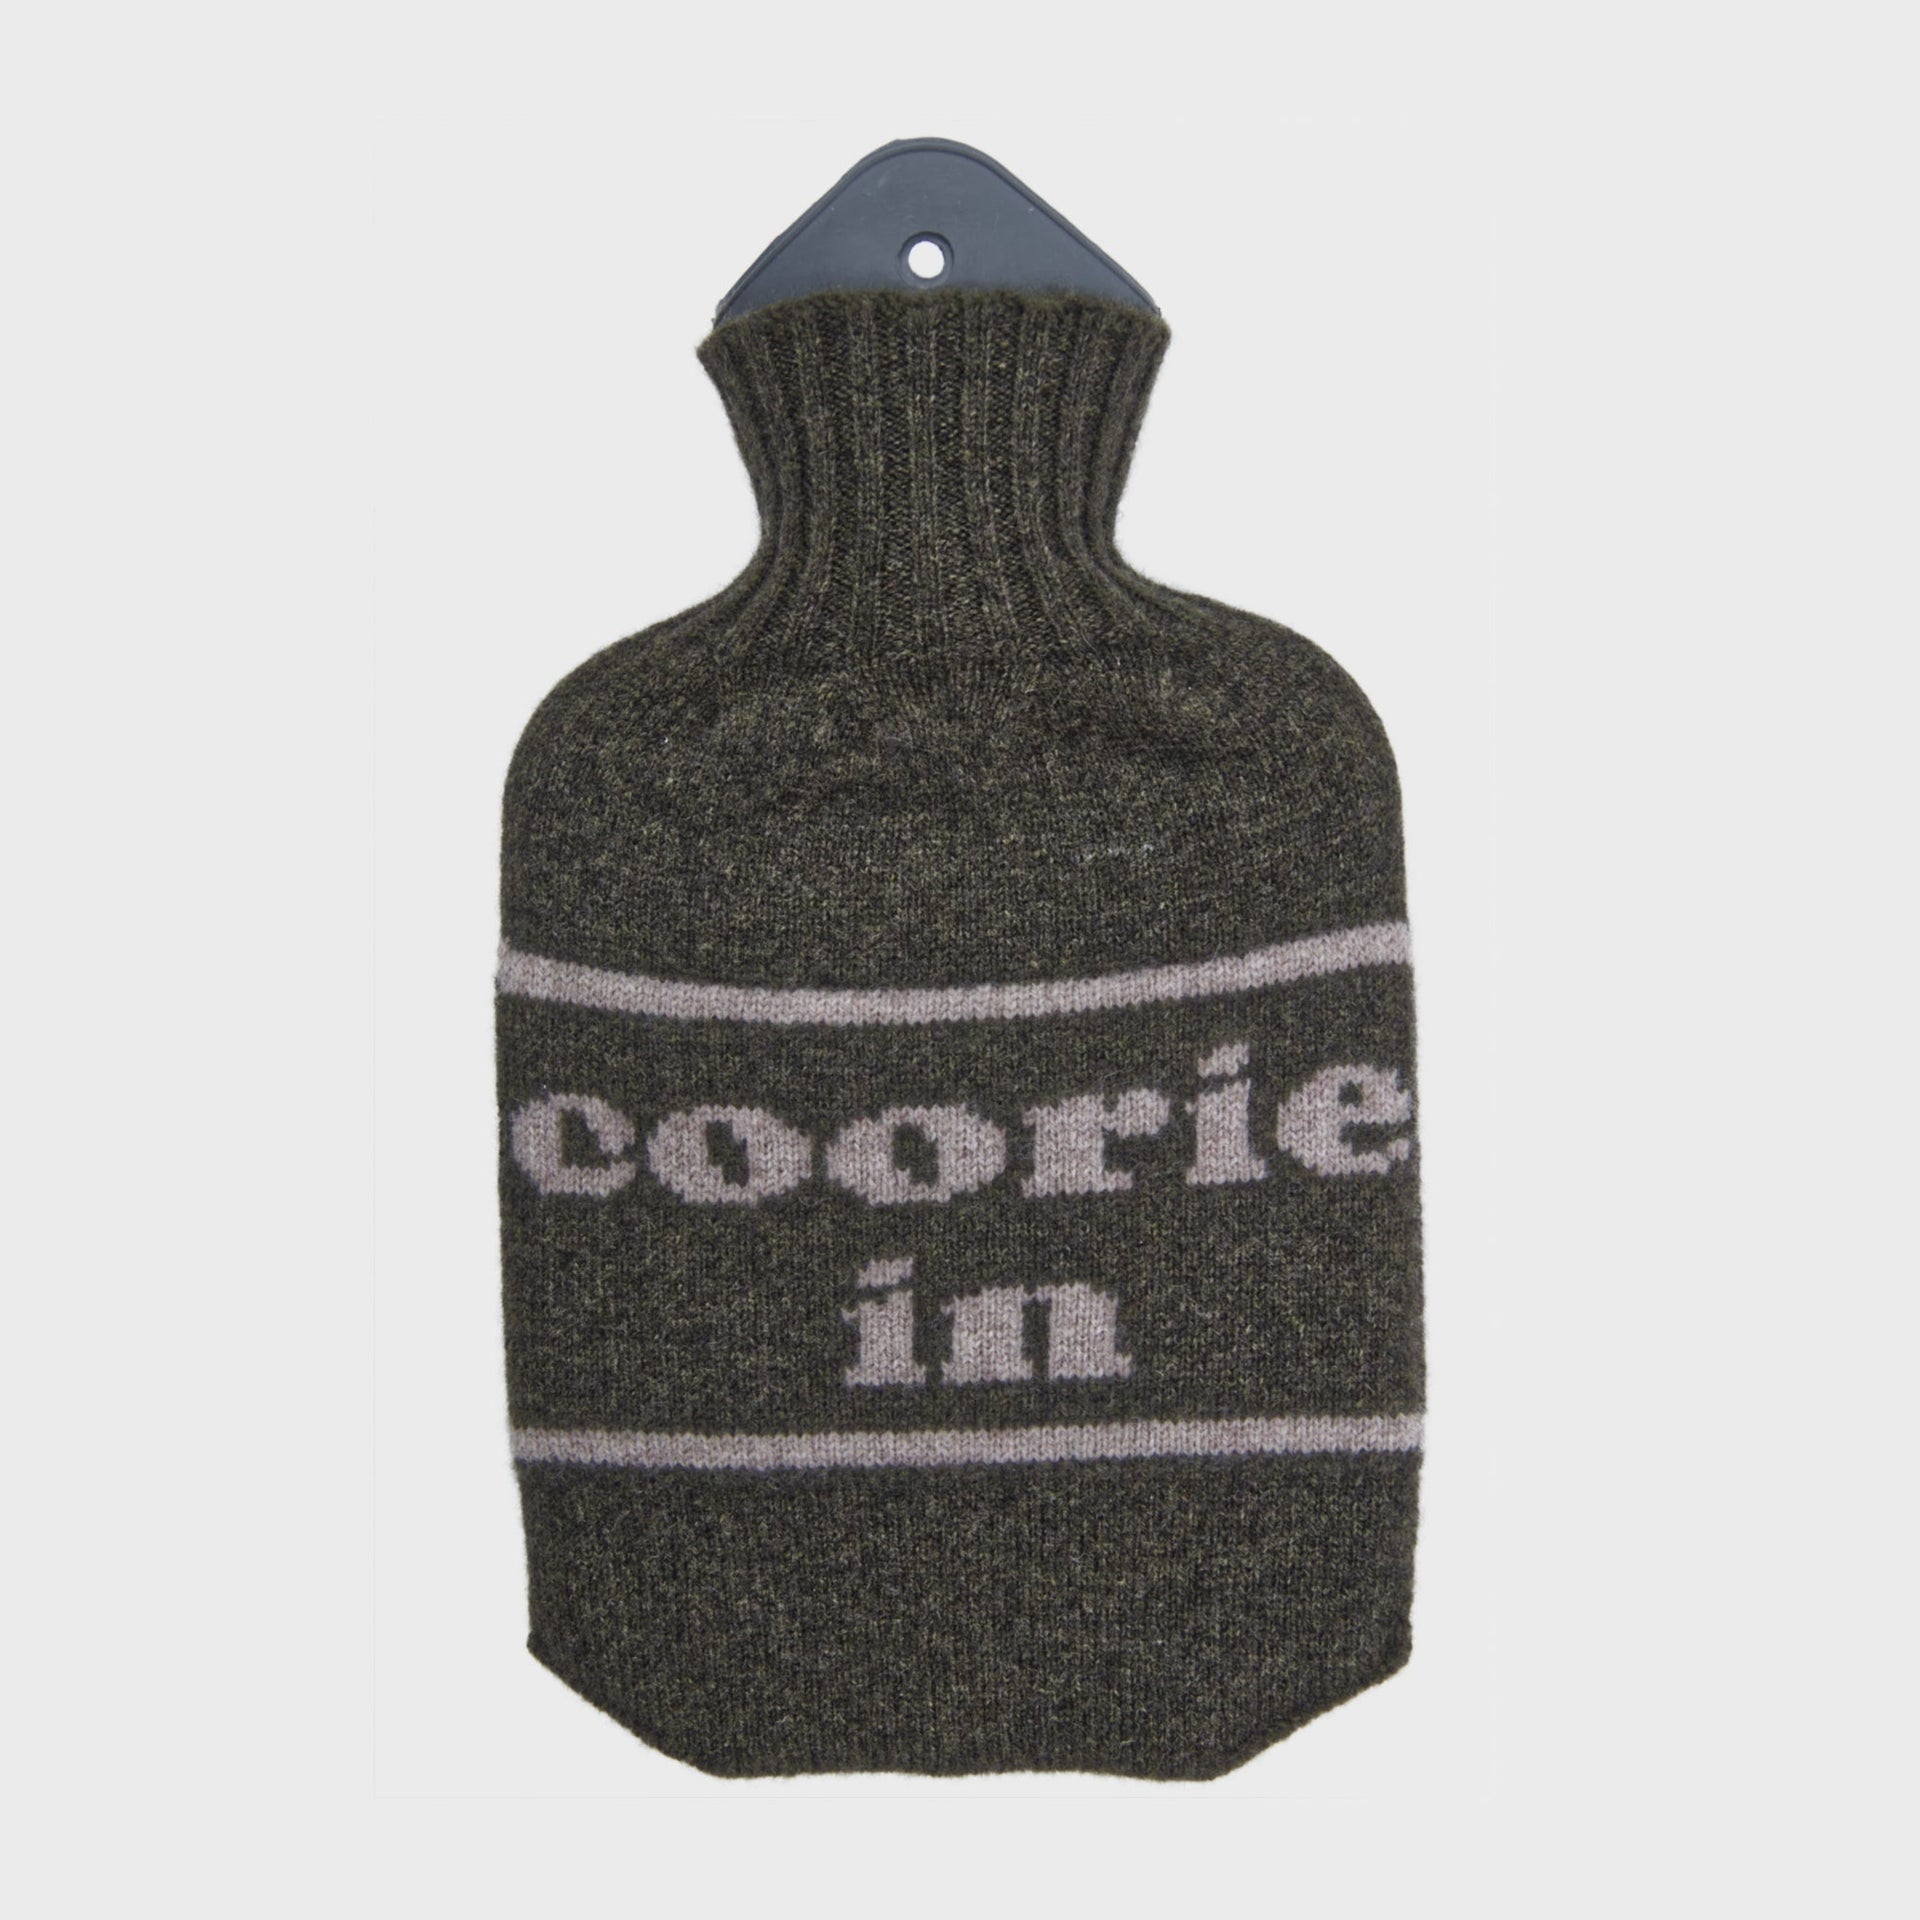 Lambswool Knit Coorie In Mini Sustainable Hot Water Bottle Charcoal/Grey - Made Scotland